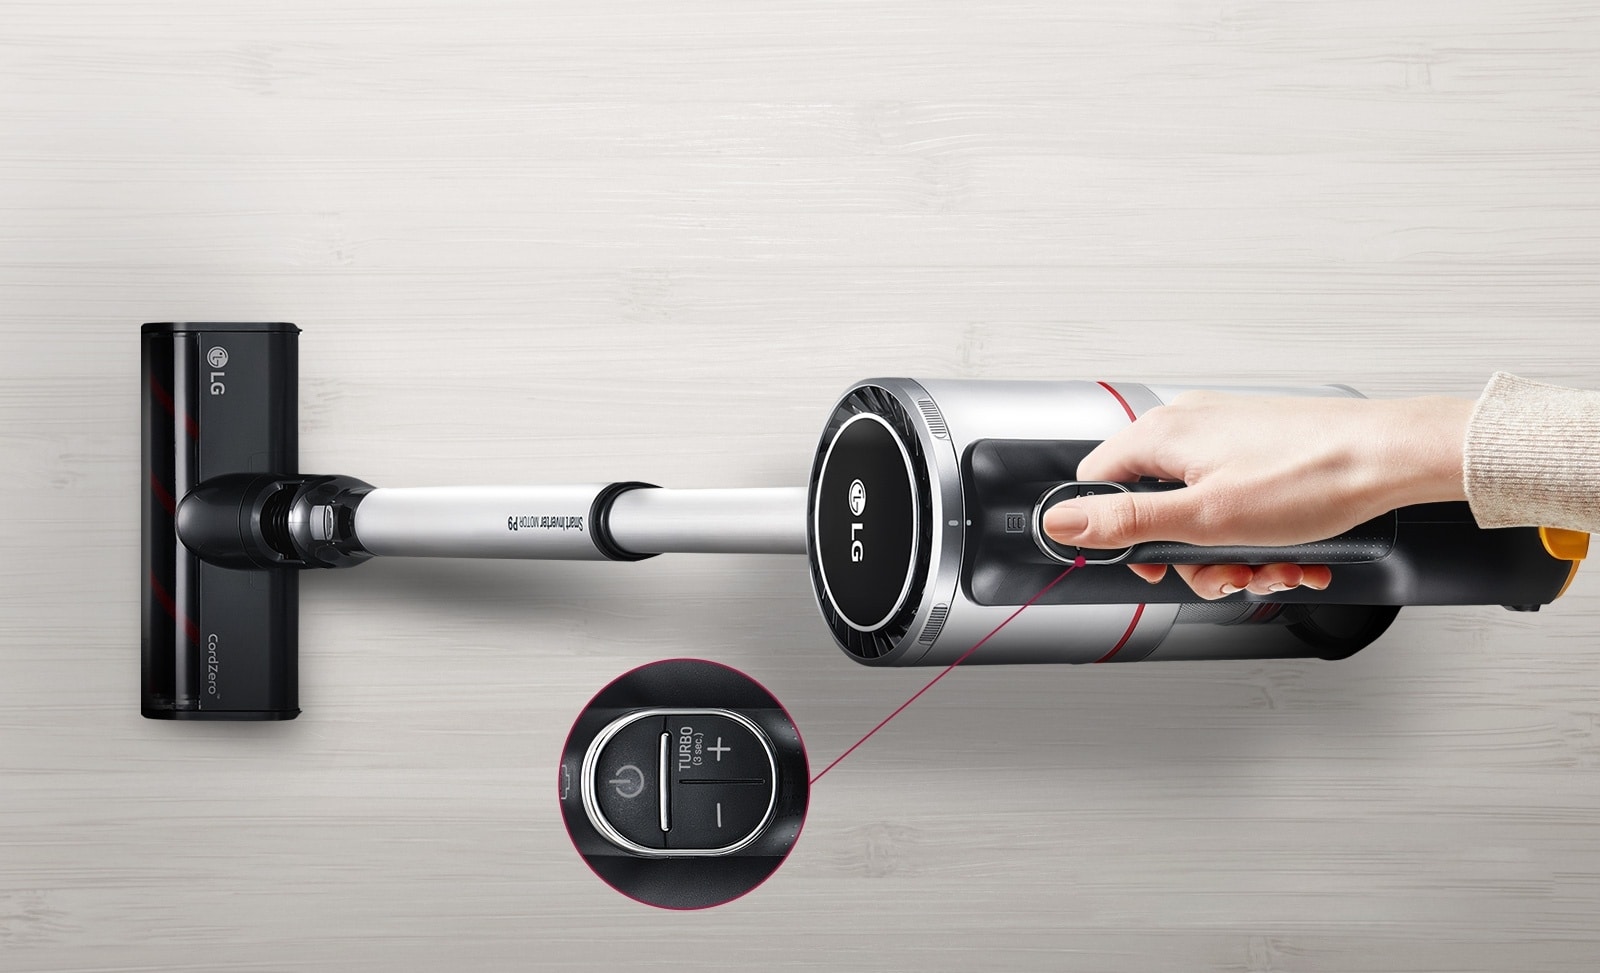 Control features with a single touch including Turbo Mode on LG CordZero™ A9 Stick Vacuum, Black